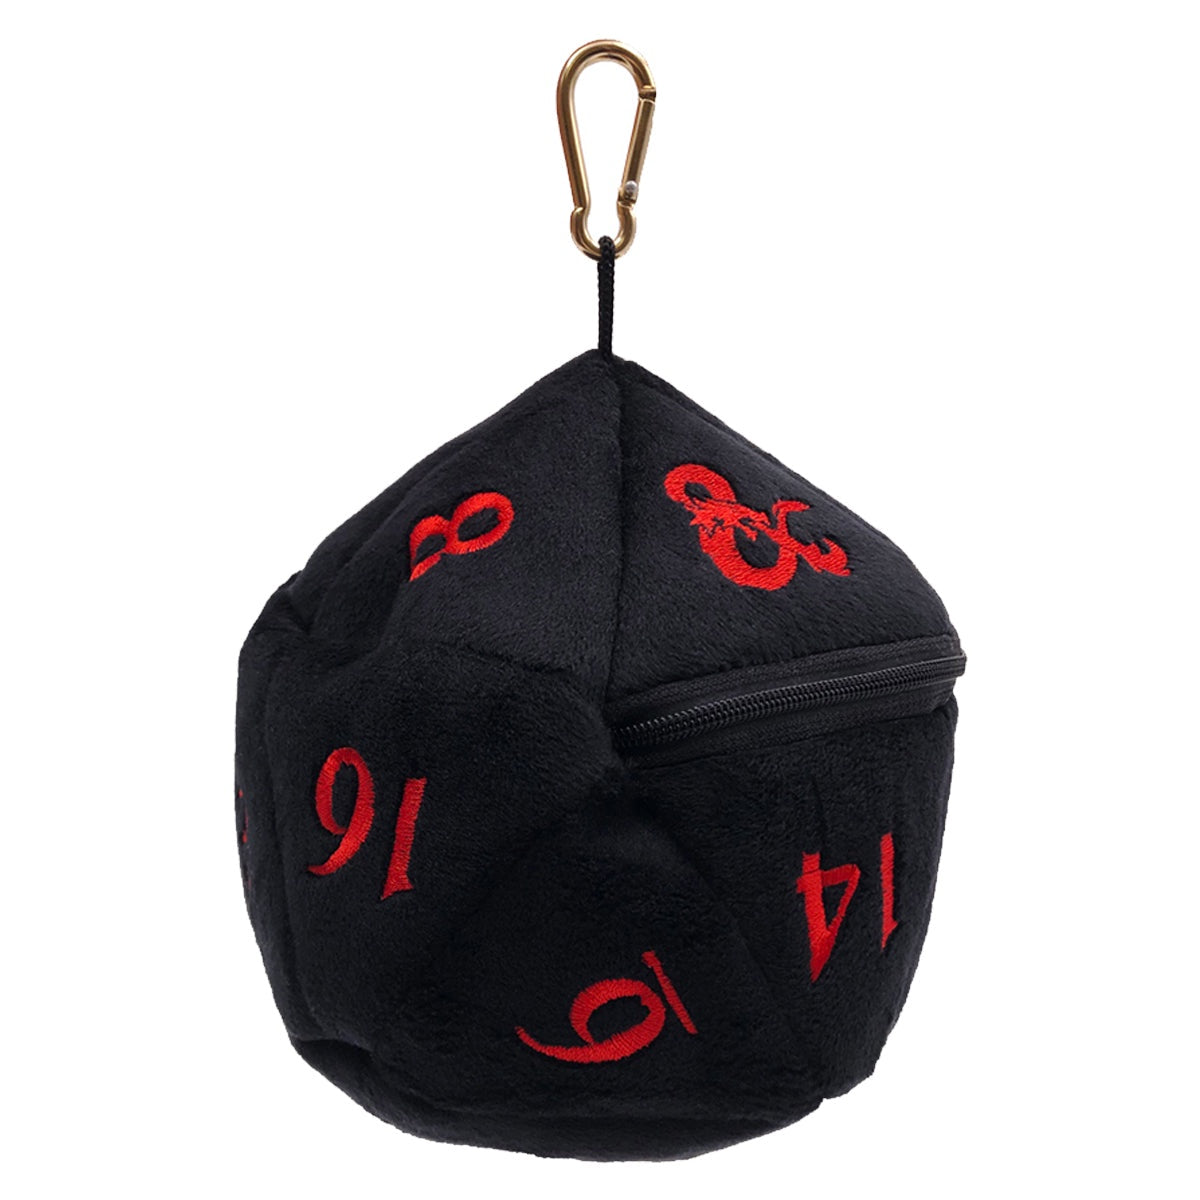 Dungeons &amp; Dragons D20 Plush Black and Red Dice Bag